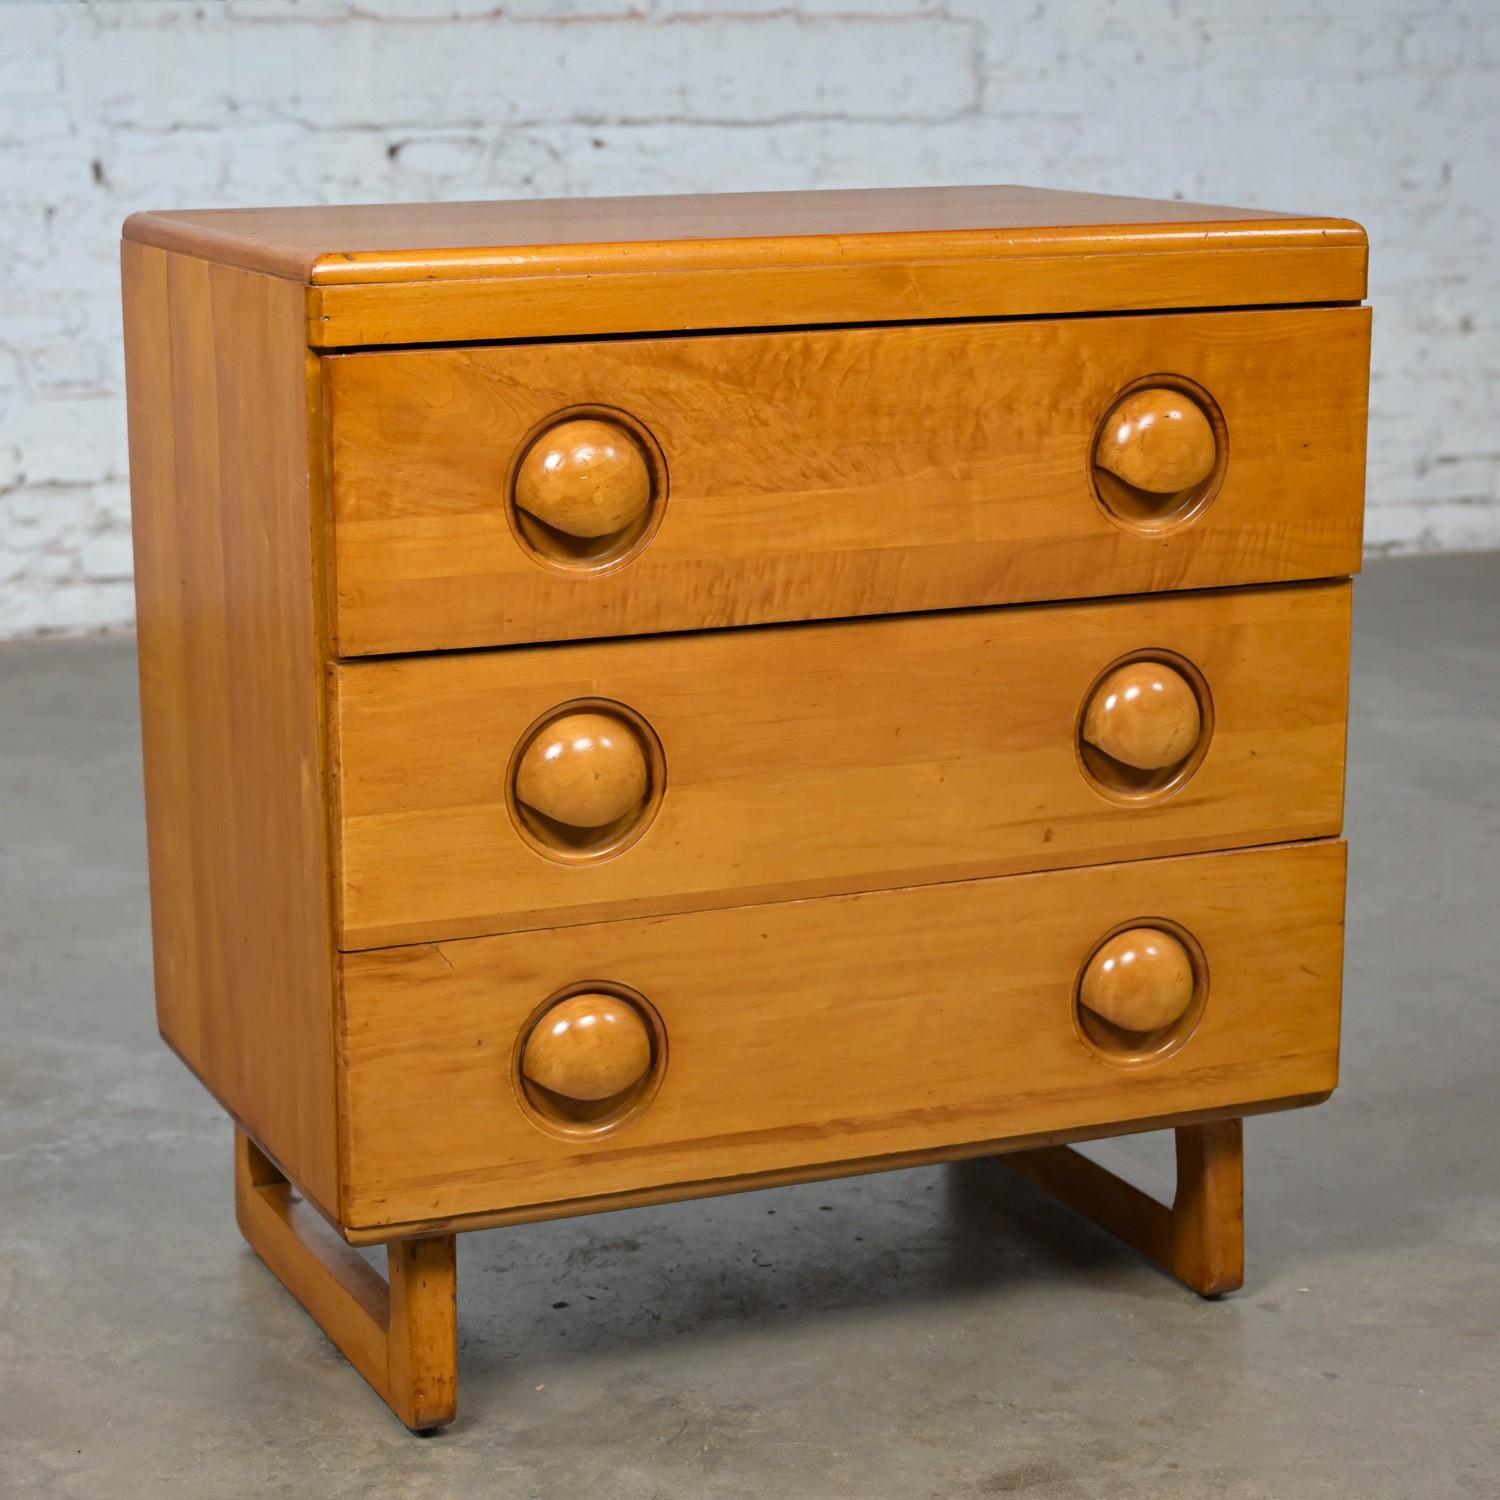 Wonderful Early to Mid-20th Century Art Moderne solid maple small 3 drawer chest or cabinet in the style of Bissman and after Russel Wright for Conant Ball. This piece has been attributed based upon archived research including online sources,